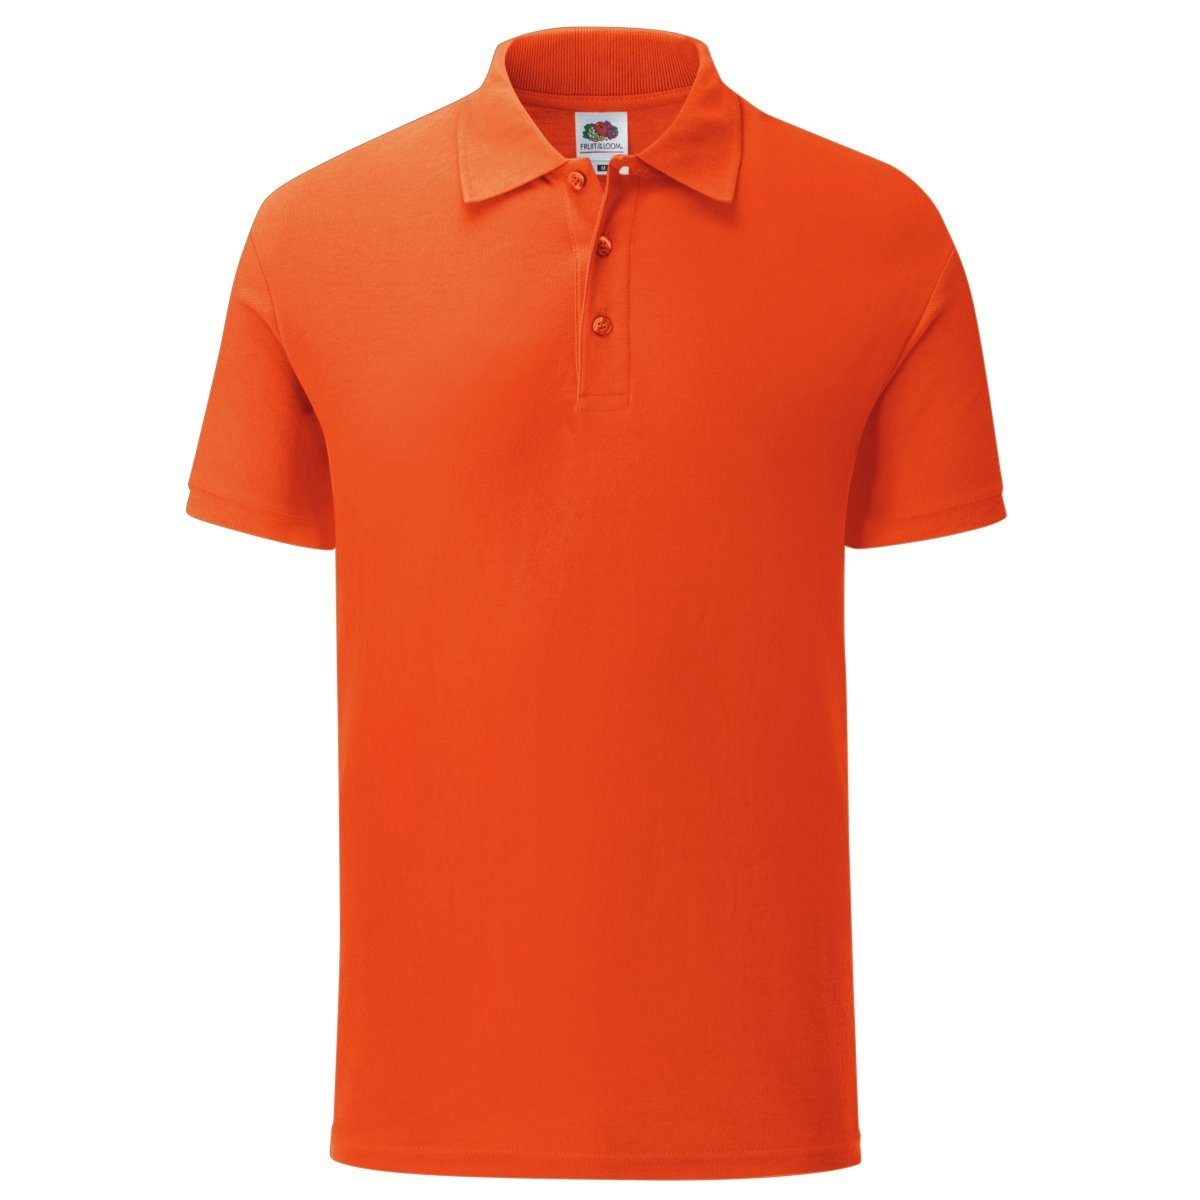 Fruit of the Polo Fruit the of Loom Iconic Loom feuerrot Poloshirt